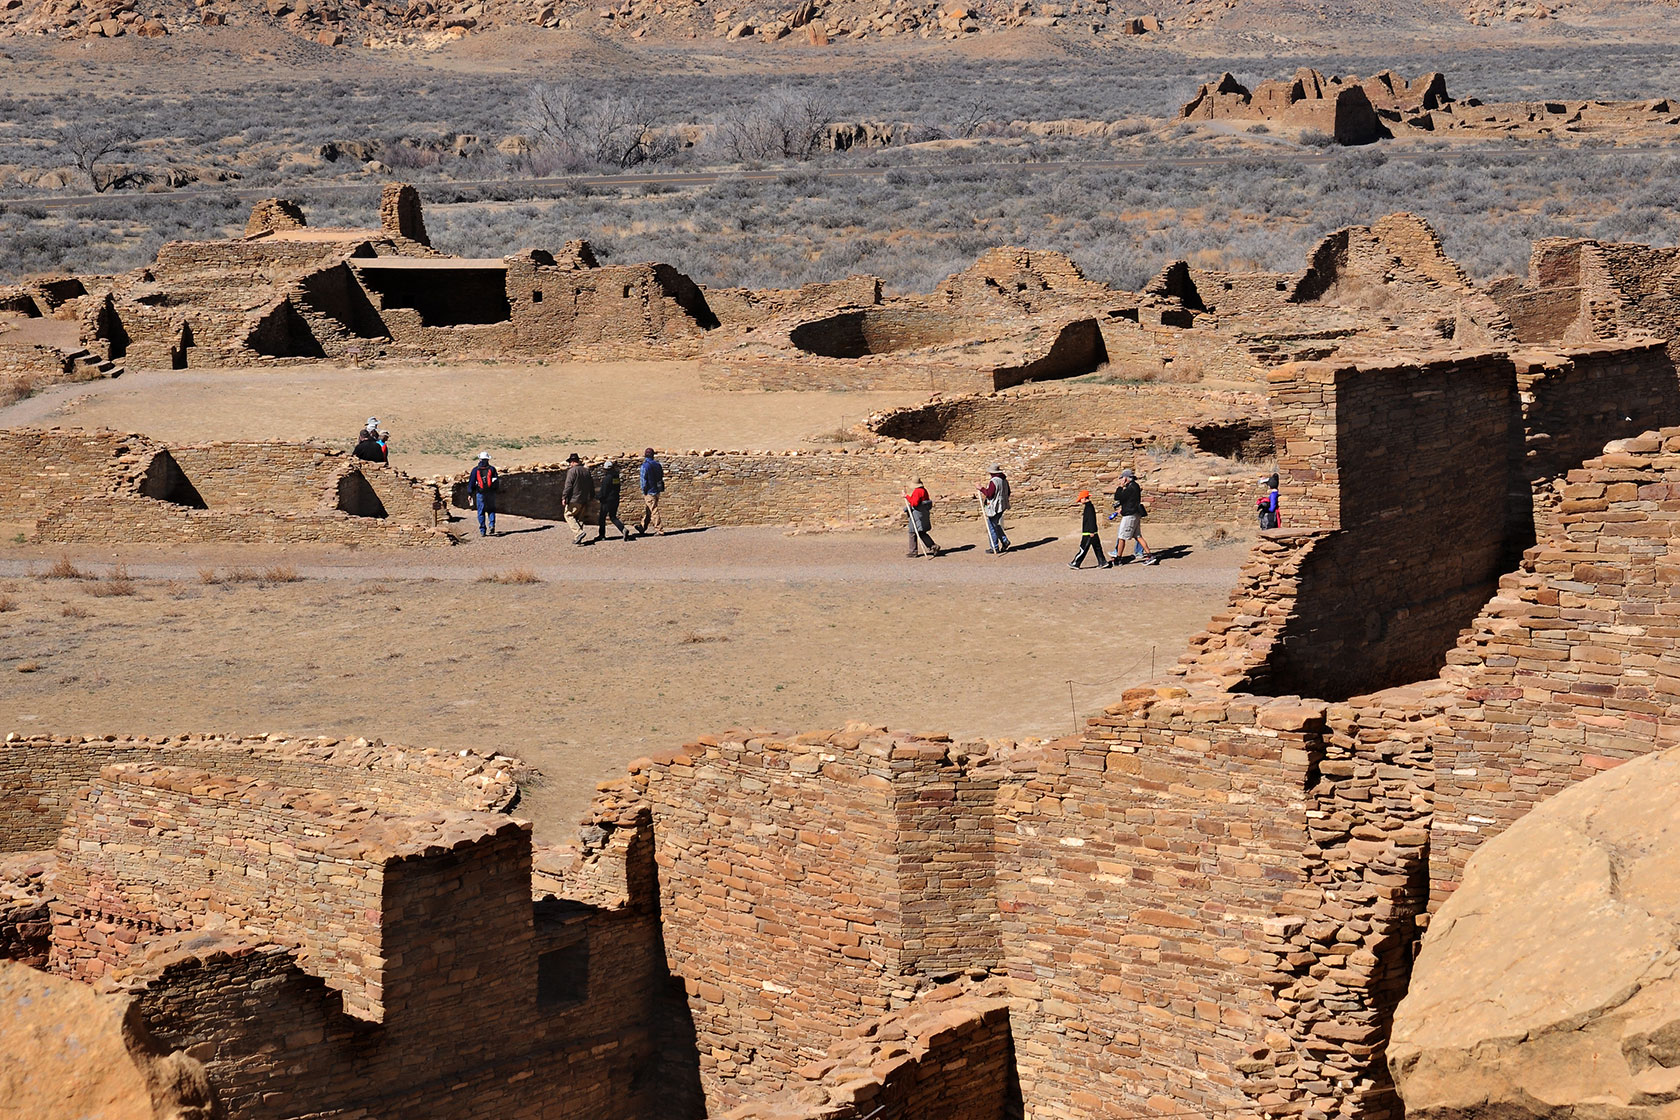 Visitors walk through the ruins of a massive stone complex at Chaco Culture National Historical Park.